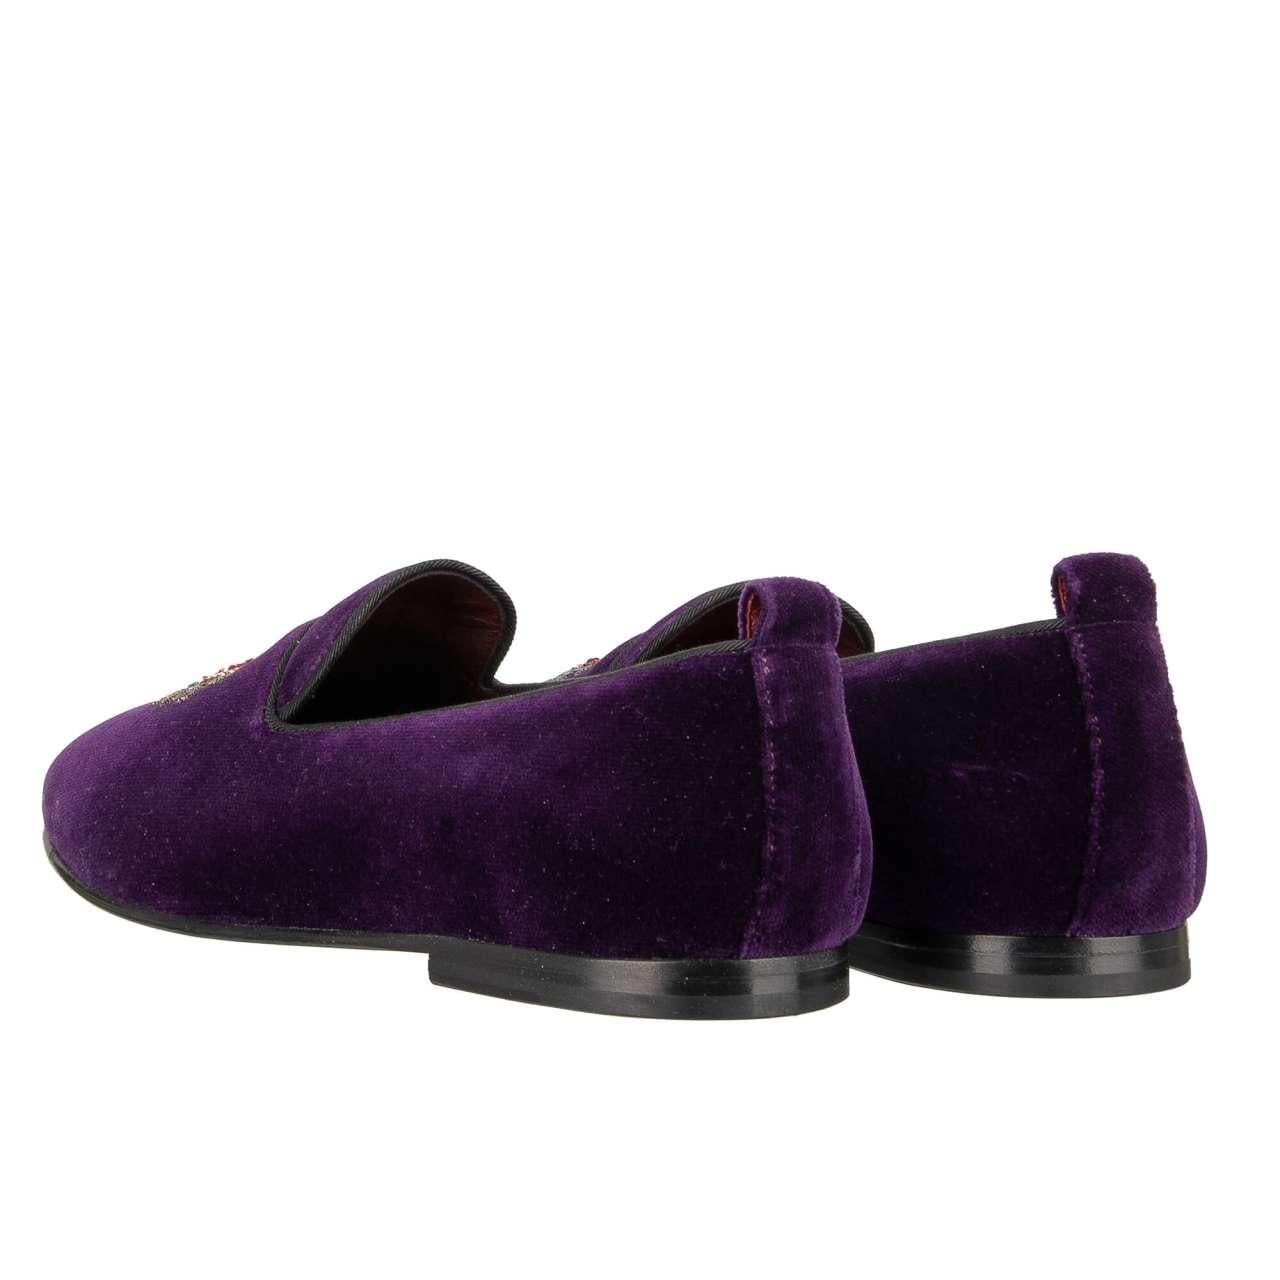 D&G - Heart Logo Embroidered Velvet Loafer YOUNG POPE Purple Red EUR 41 For Sale 2